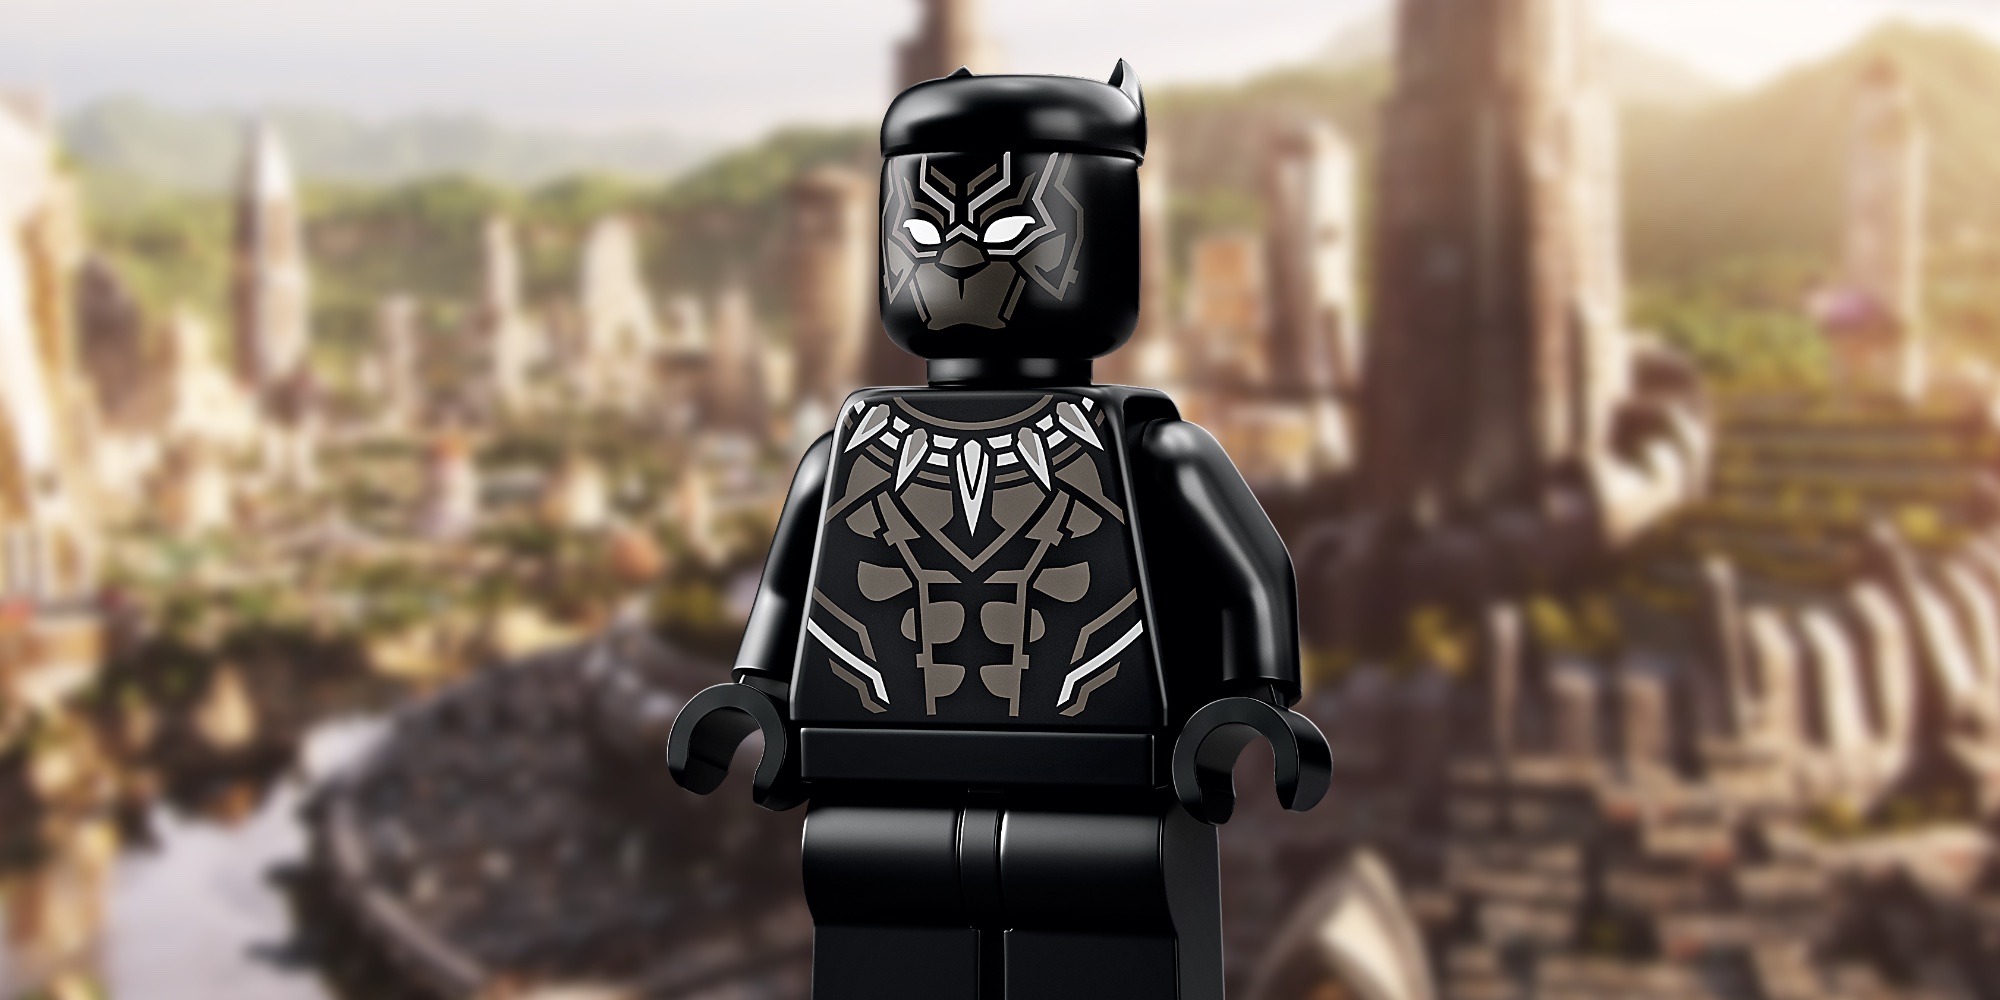 LEGO Marvel Black Panther set 76210 will launch at $500 this fall